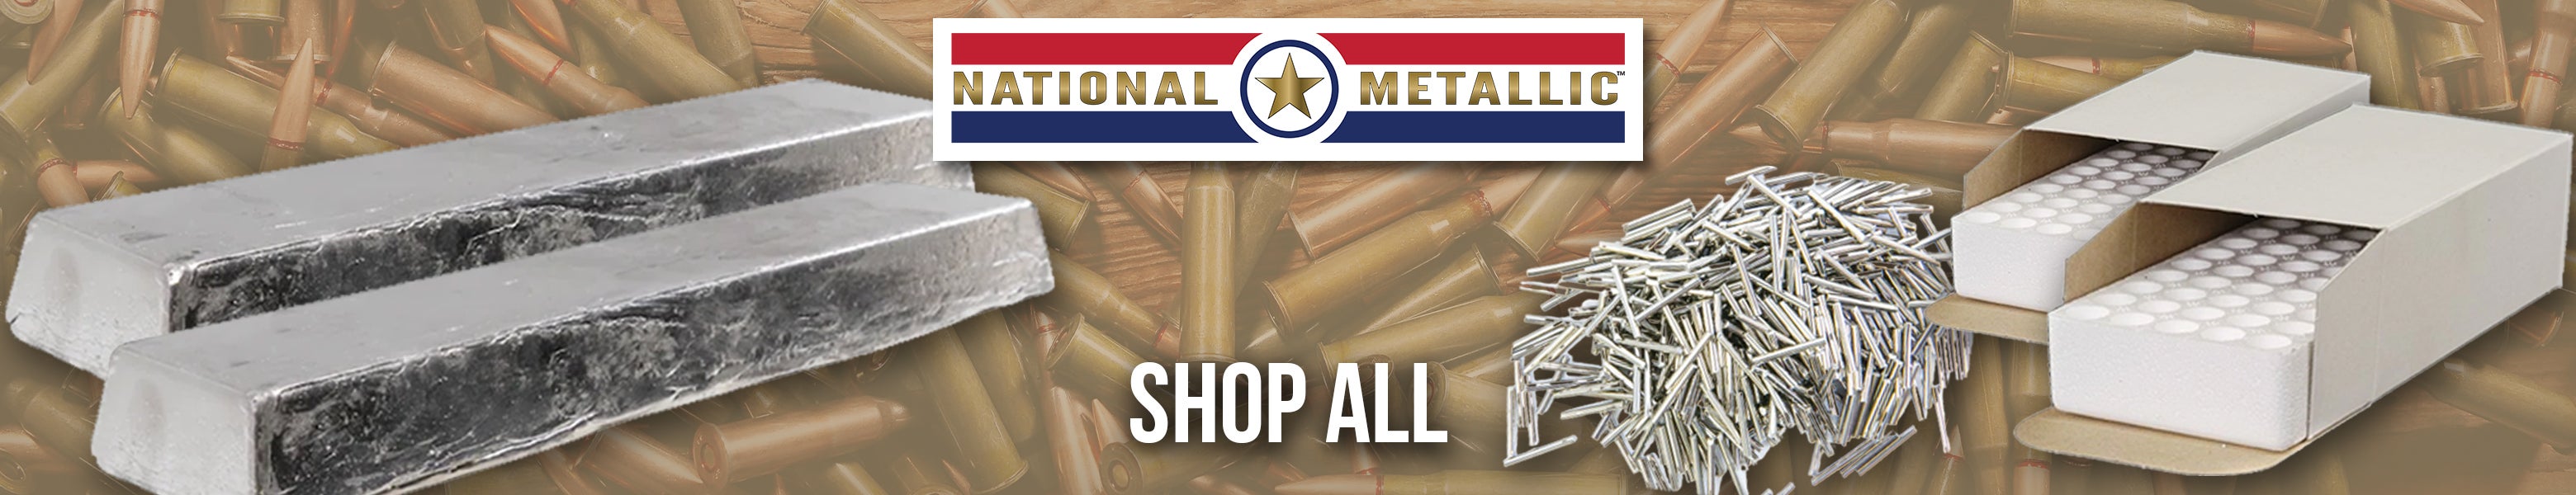 Shop All National Metallic Products